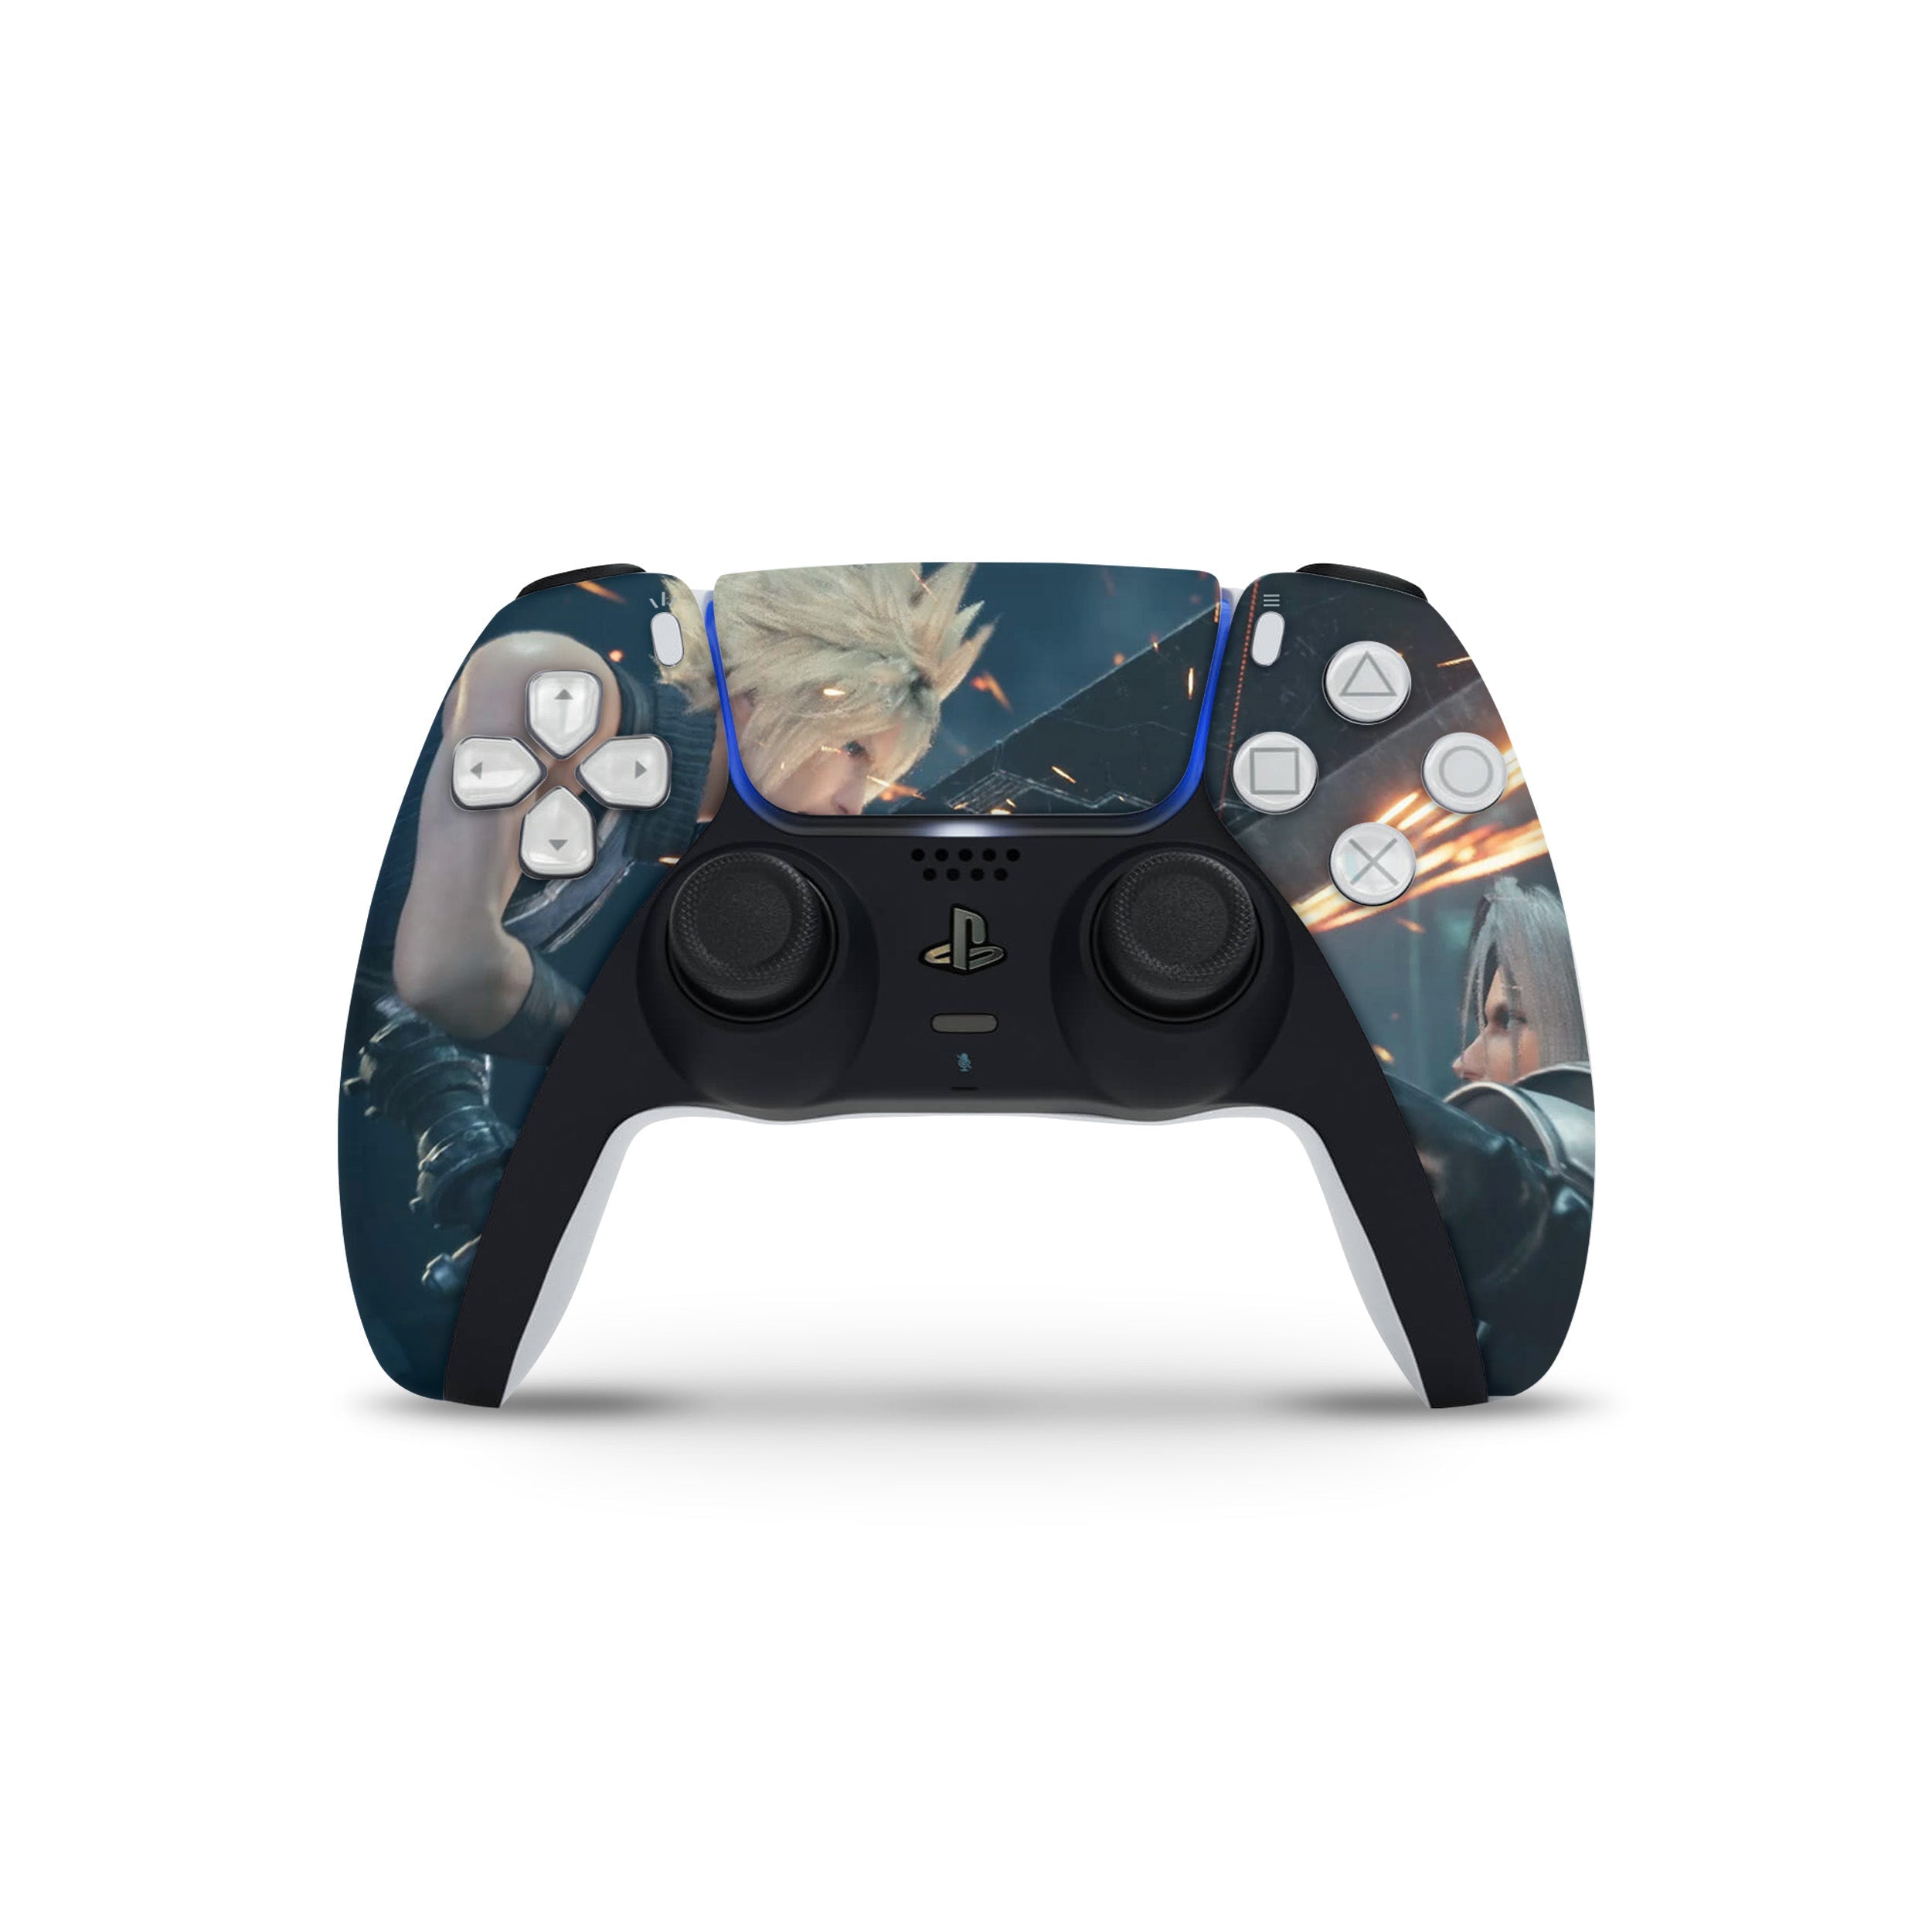 A video game skin featuring a Final Fantasy 7 Cloud vs Sephiroth design for the PS5 DualSense Controller.